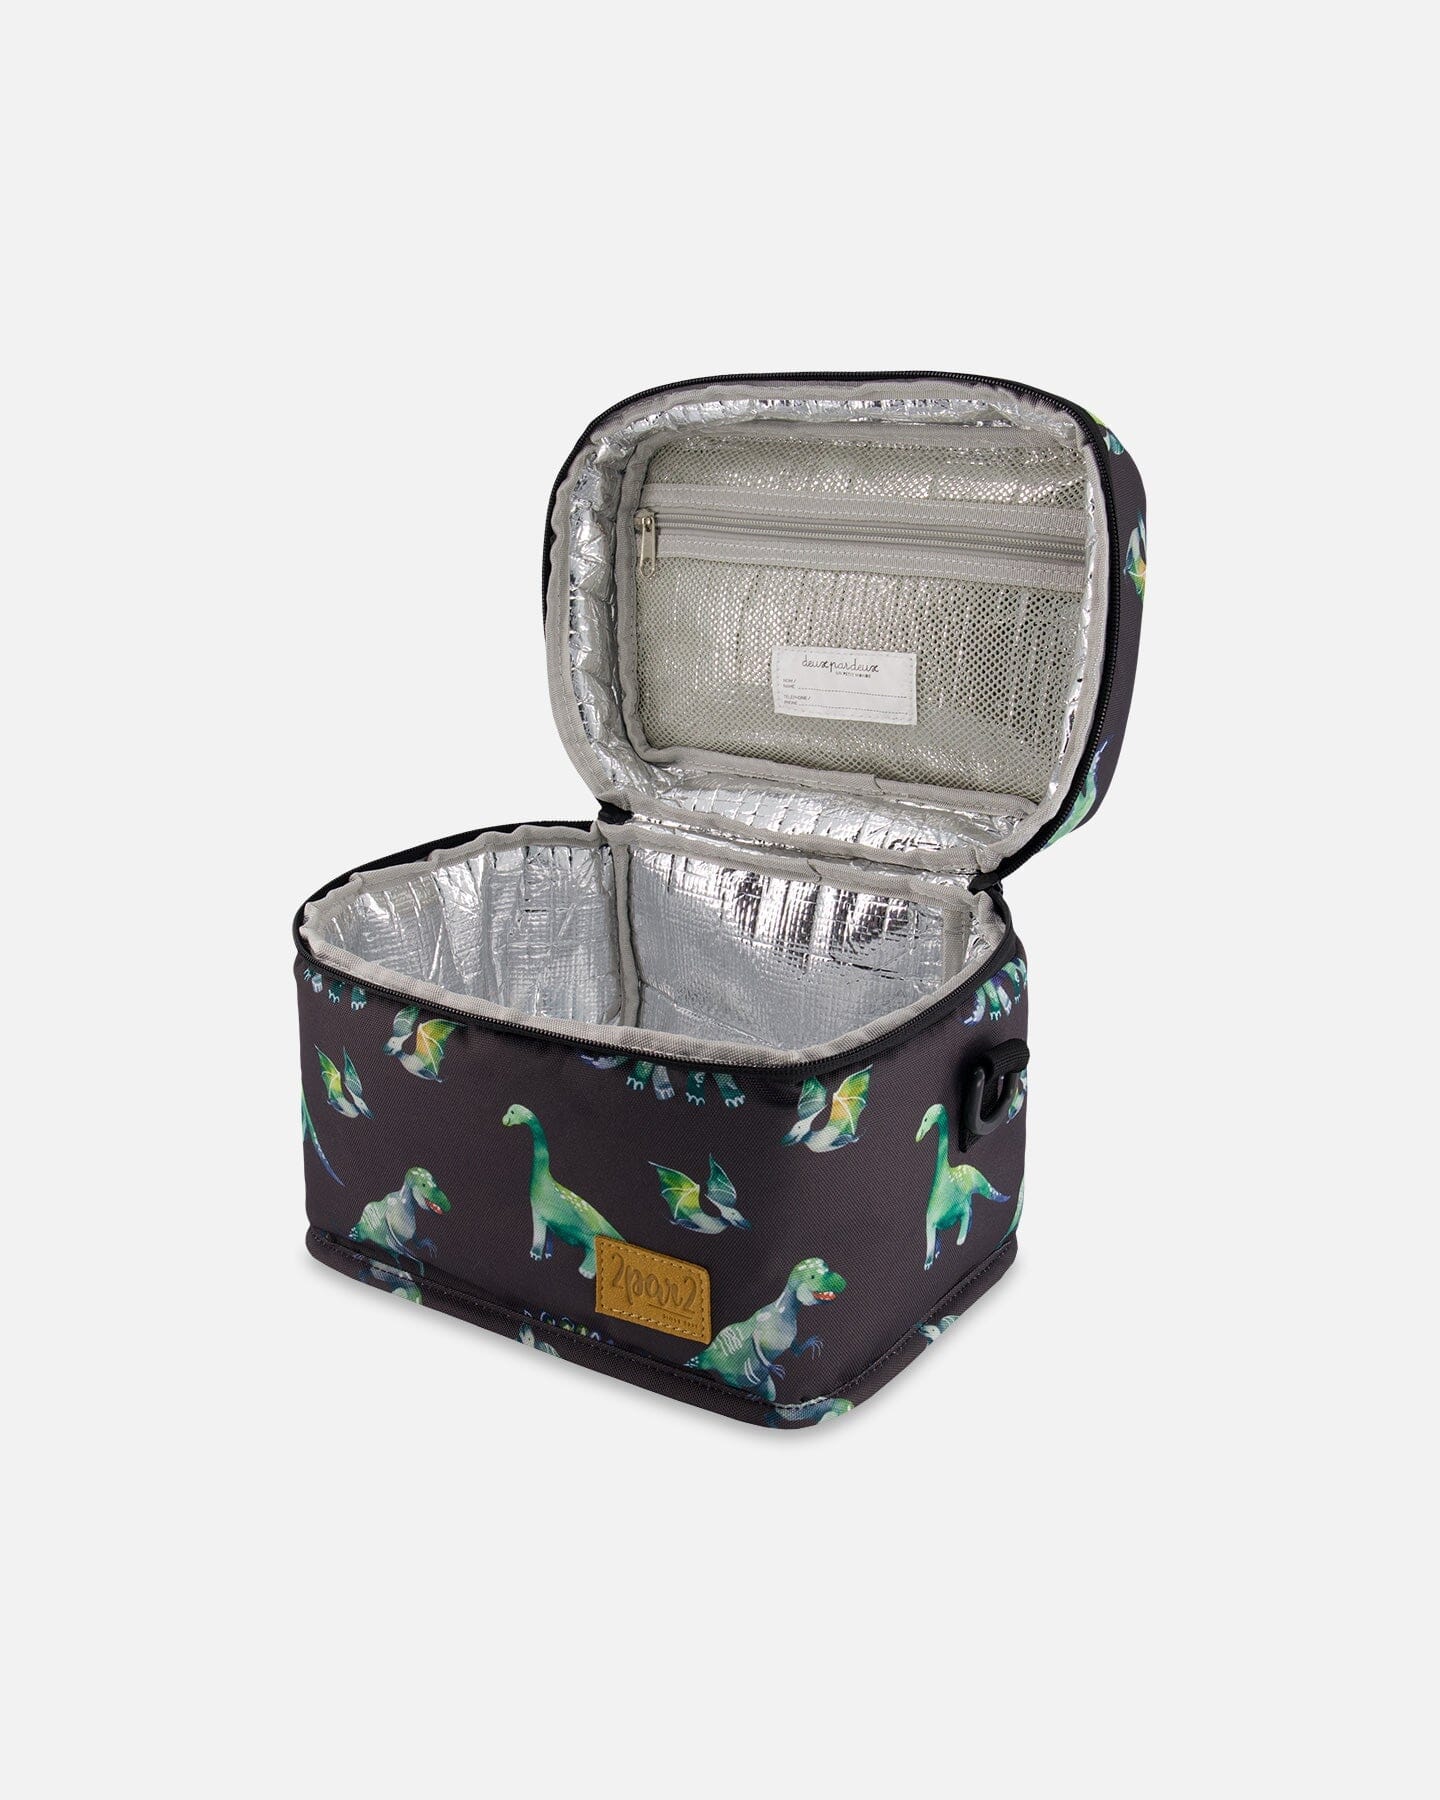 Lunch Box Grey Printed Dinosaurs - F30ZBL_051